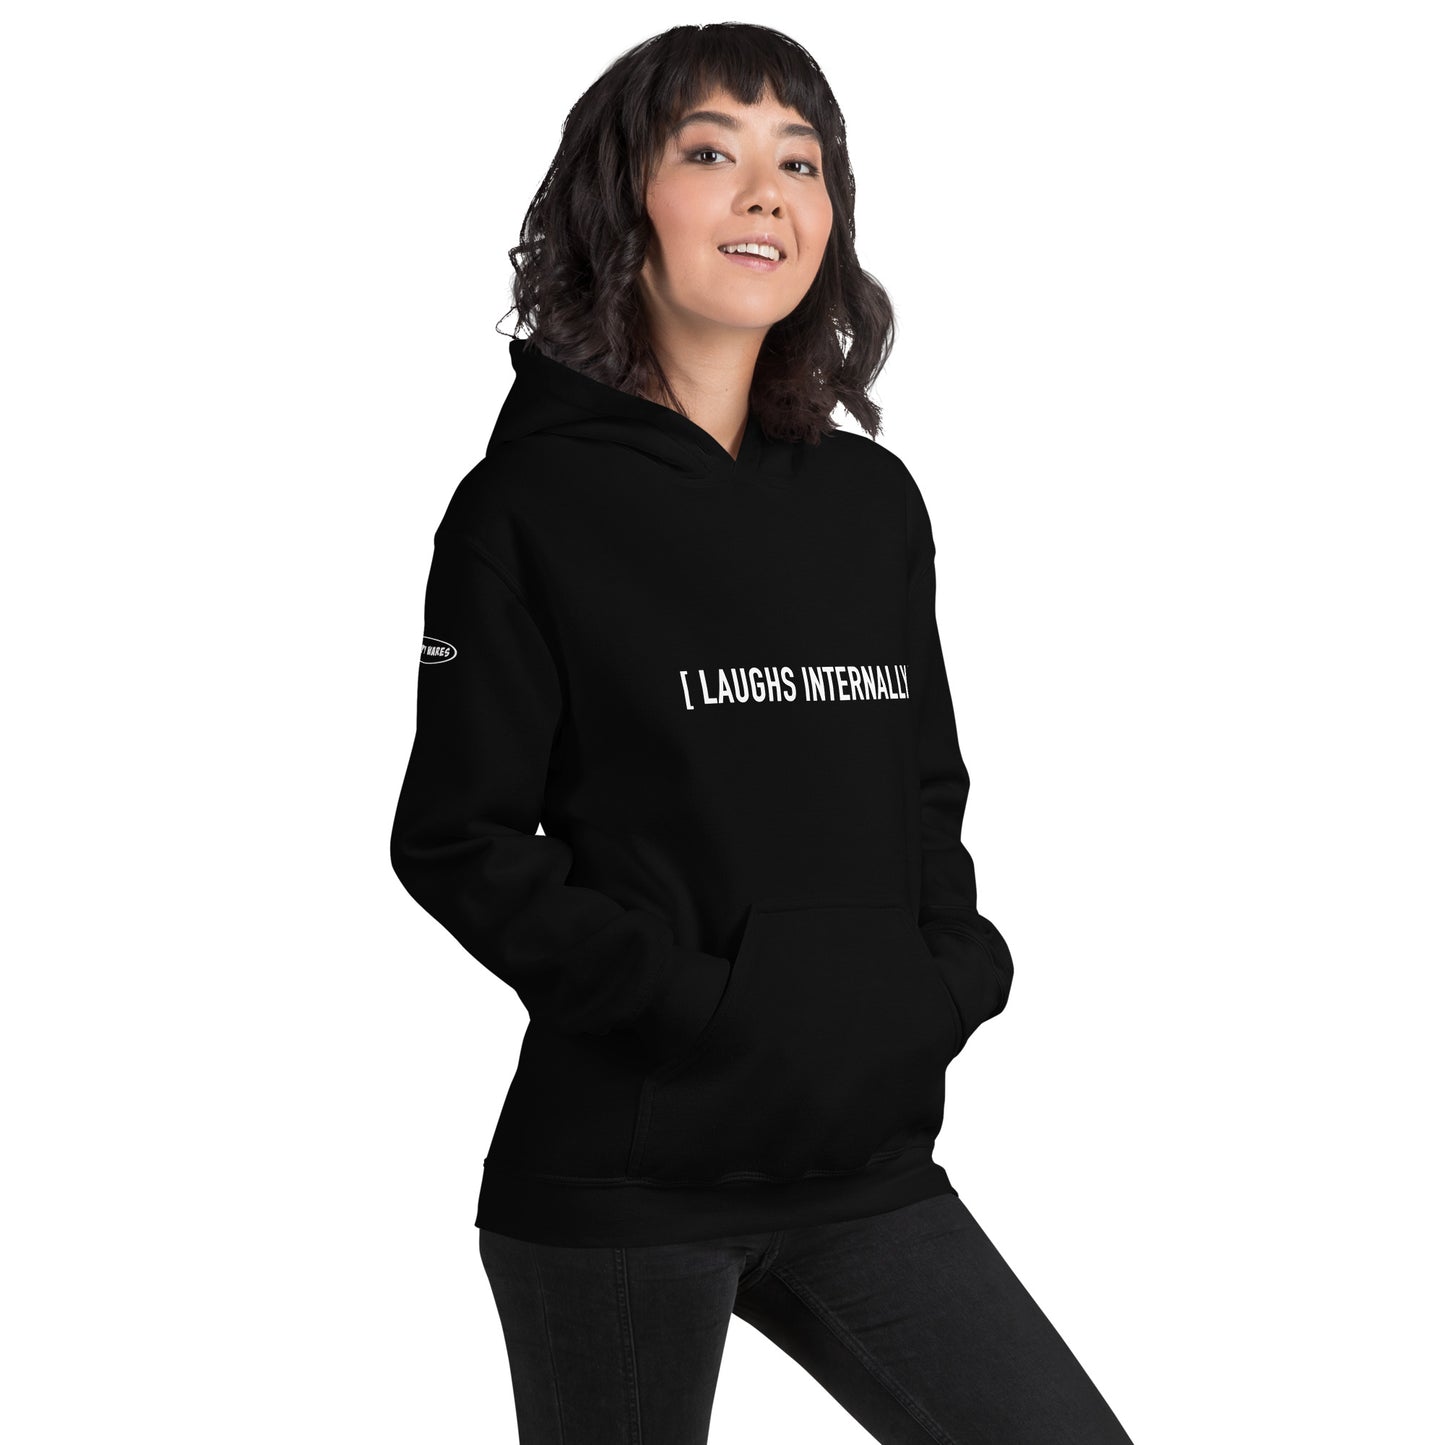 SUBTITLE - [Laughs Internally] - Funny Hoodie